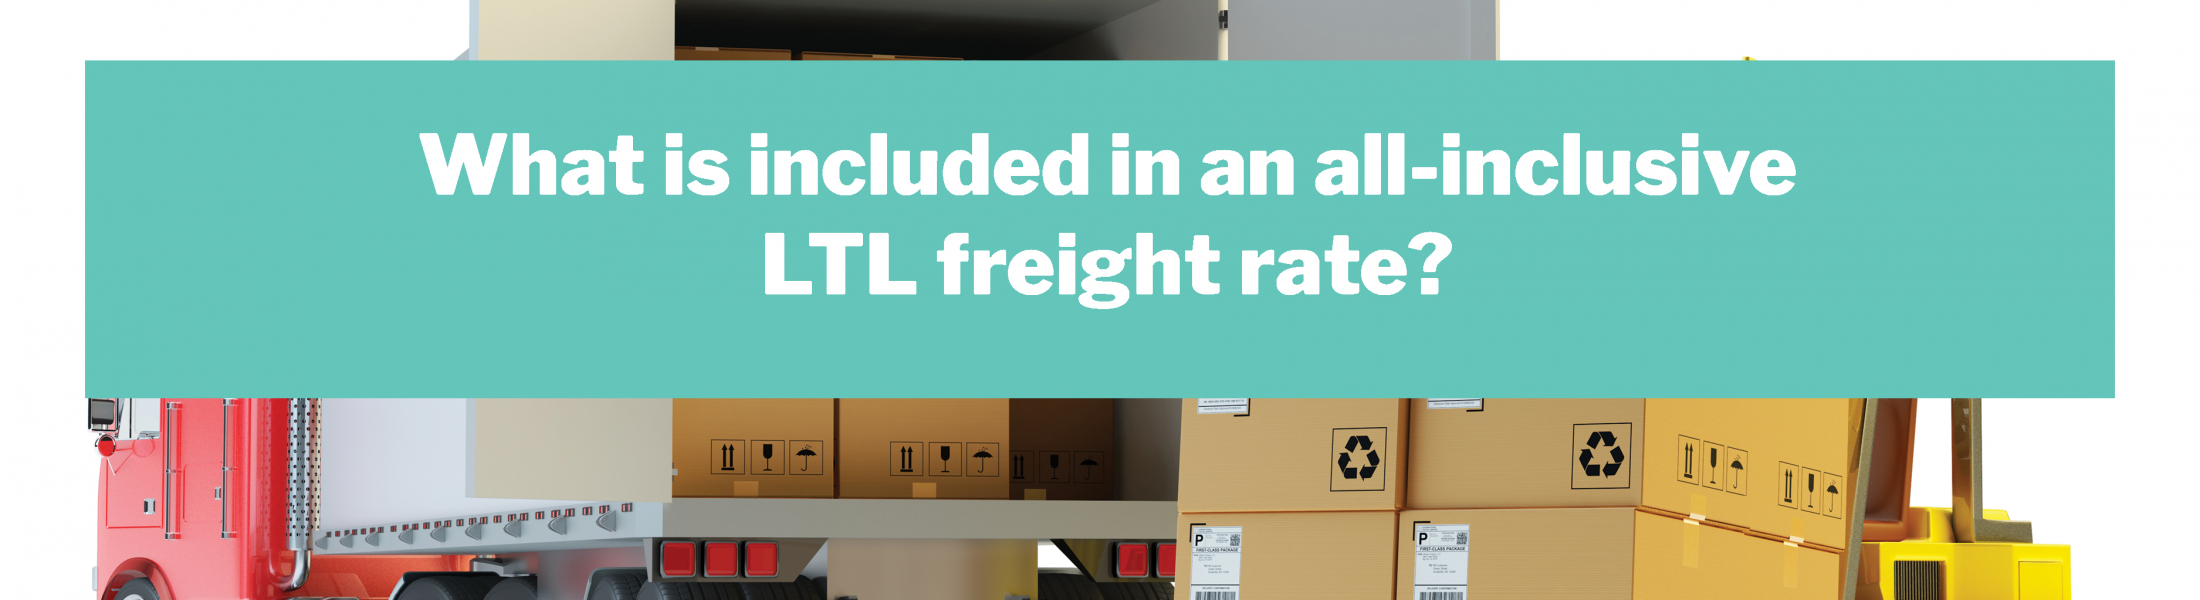 What is included in an allinclusive LTL freight rate? Logistics